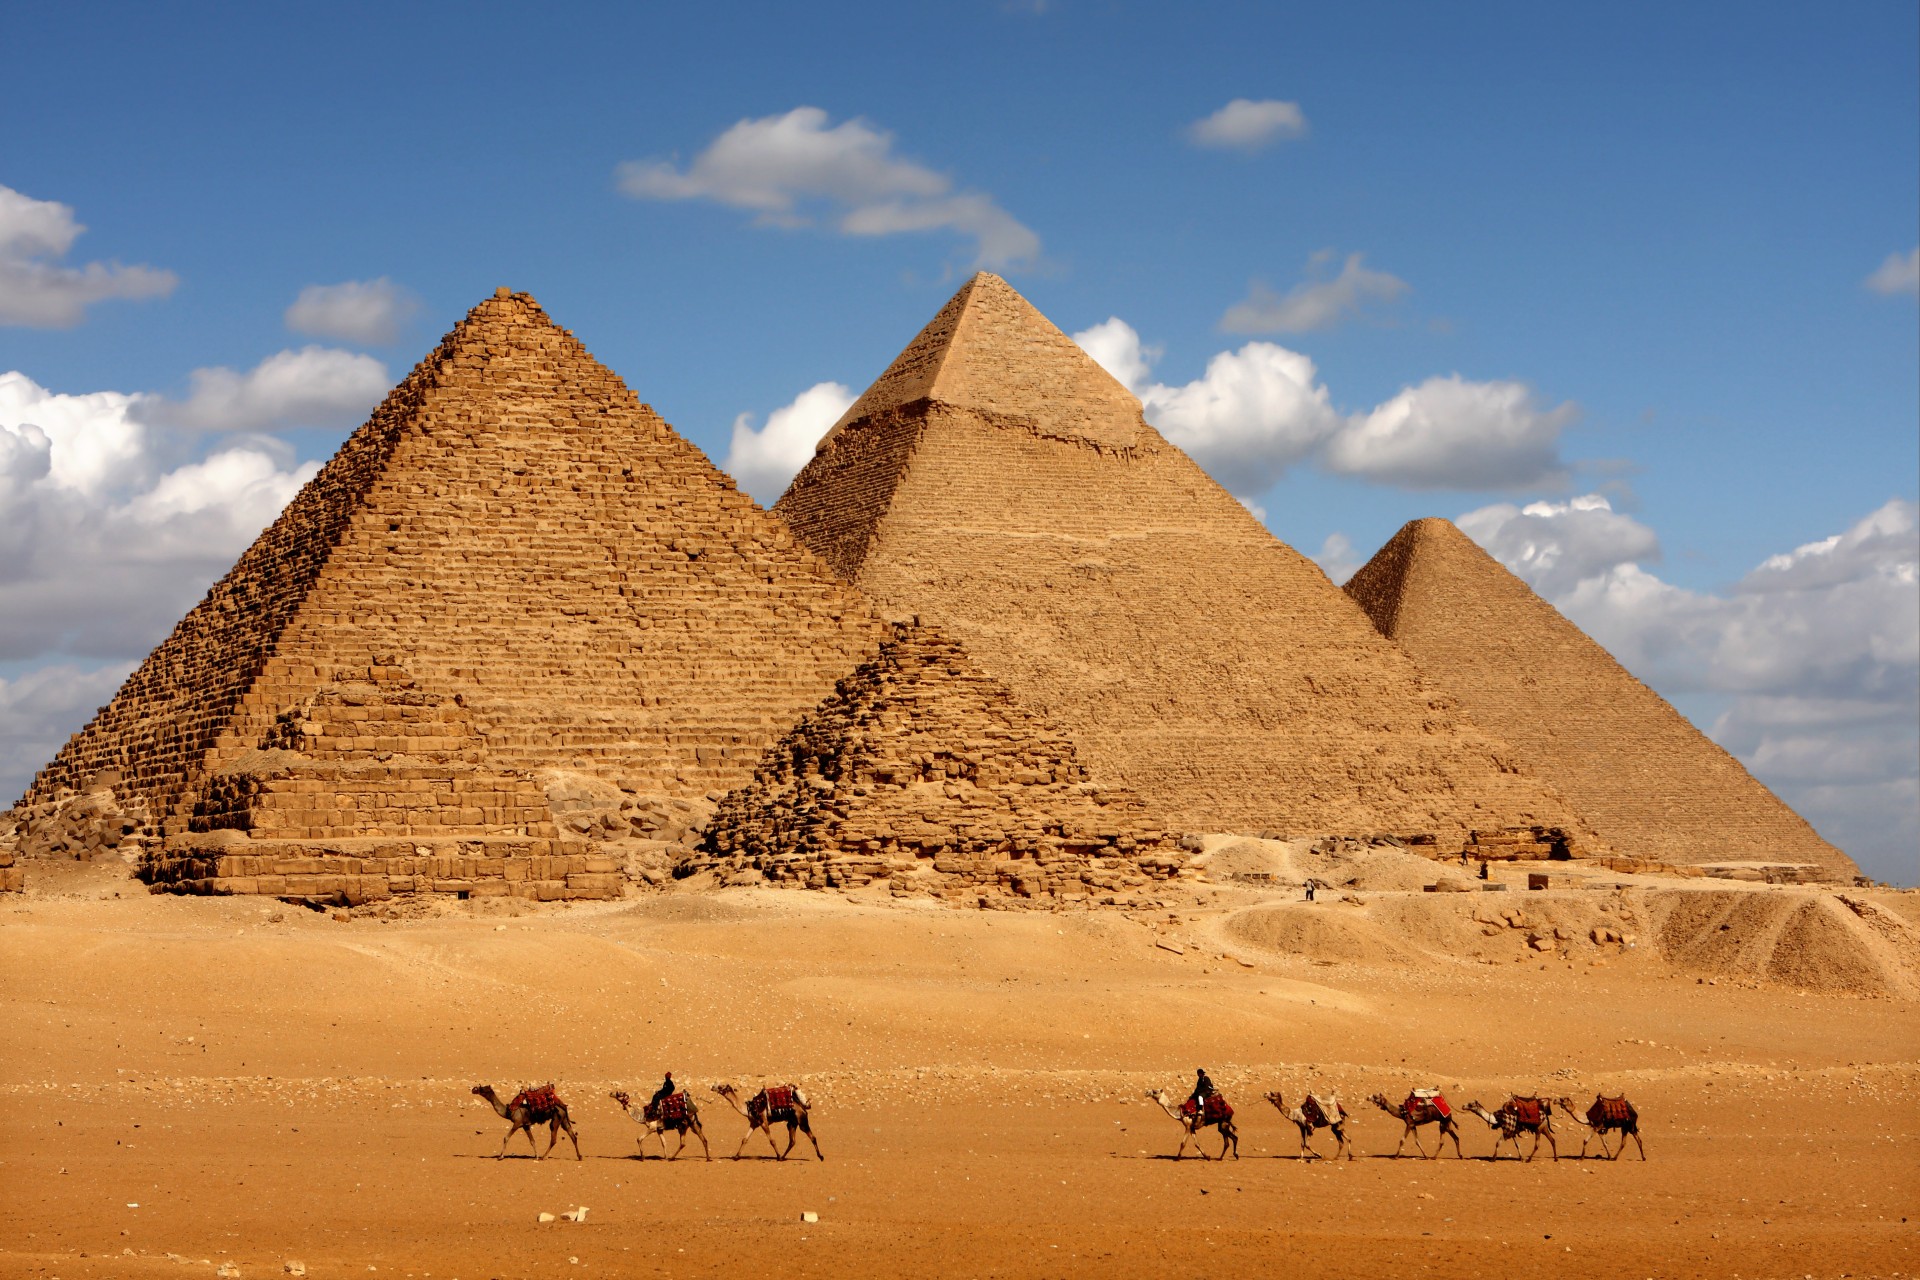 The pyramids of Giza in Cairo, Egypt with a camel caravan panoramic scenic view